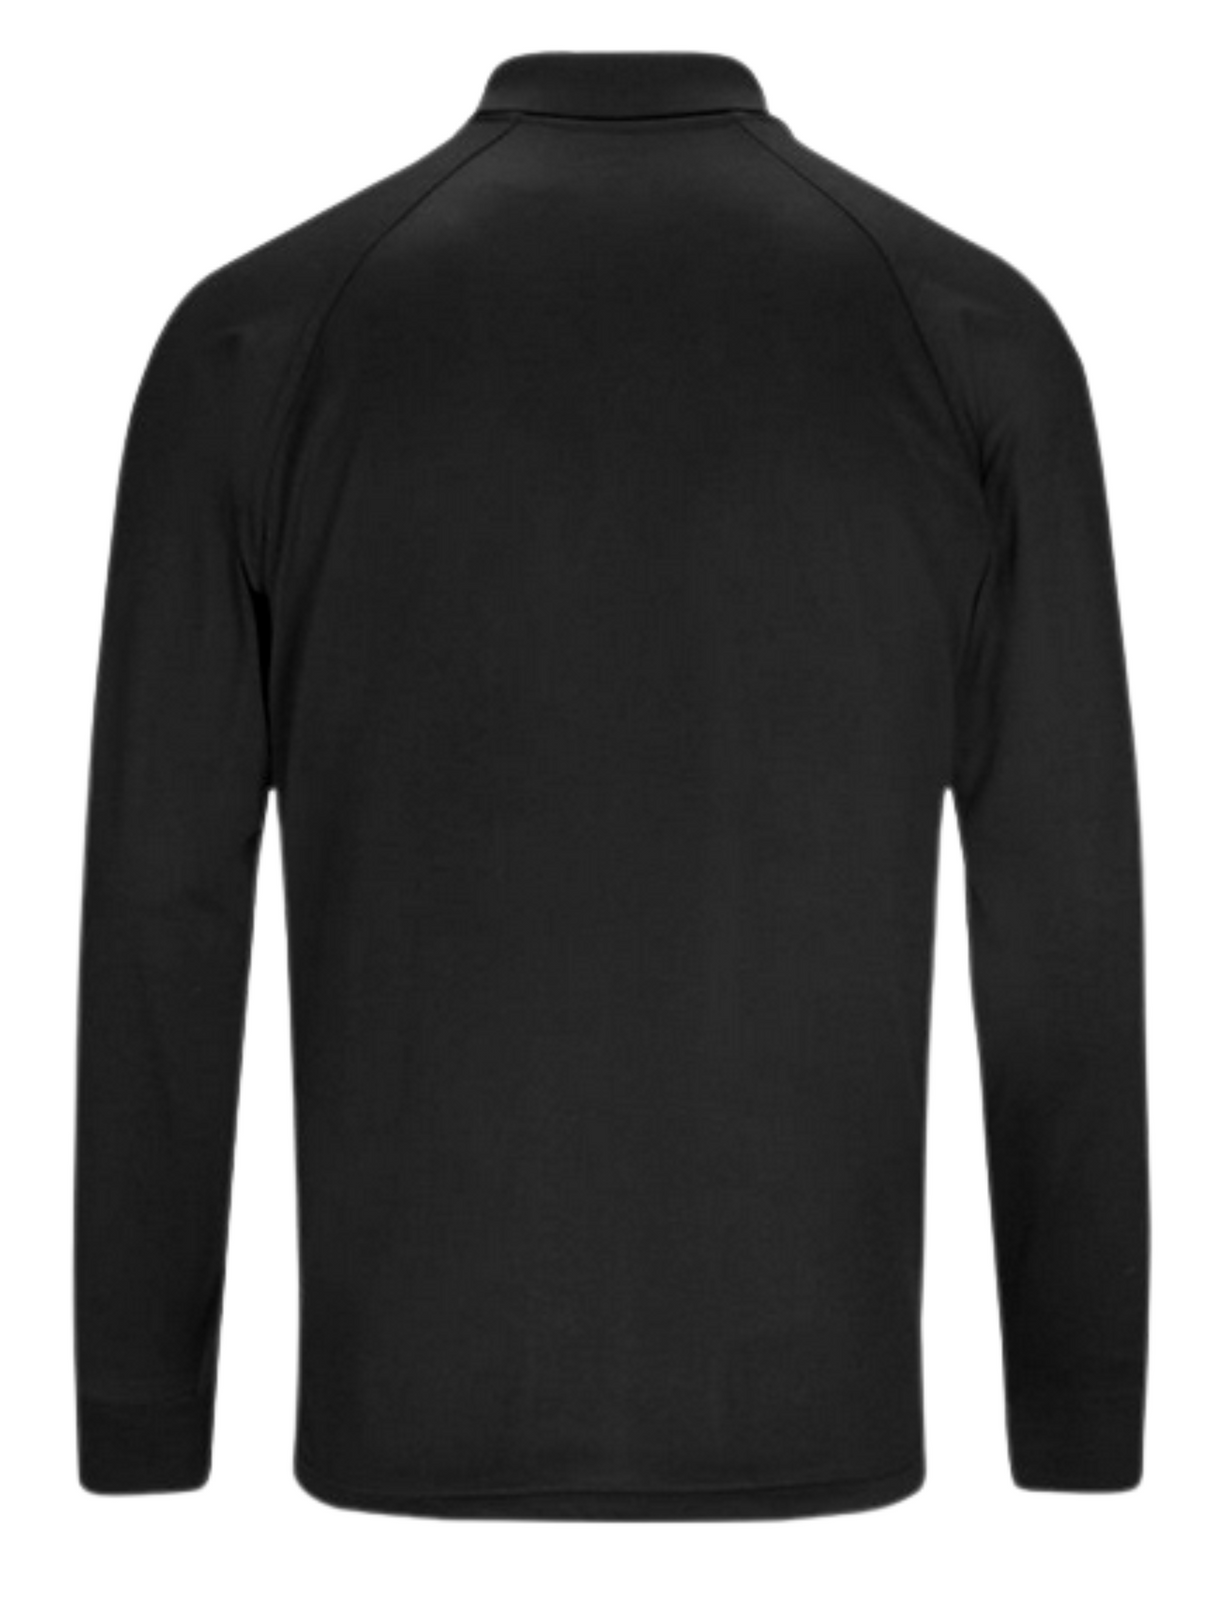 TACTICAL Federal Bureau of Investigation Polo - Men's Long Sleeve - FEDS Apparel